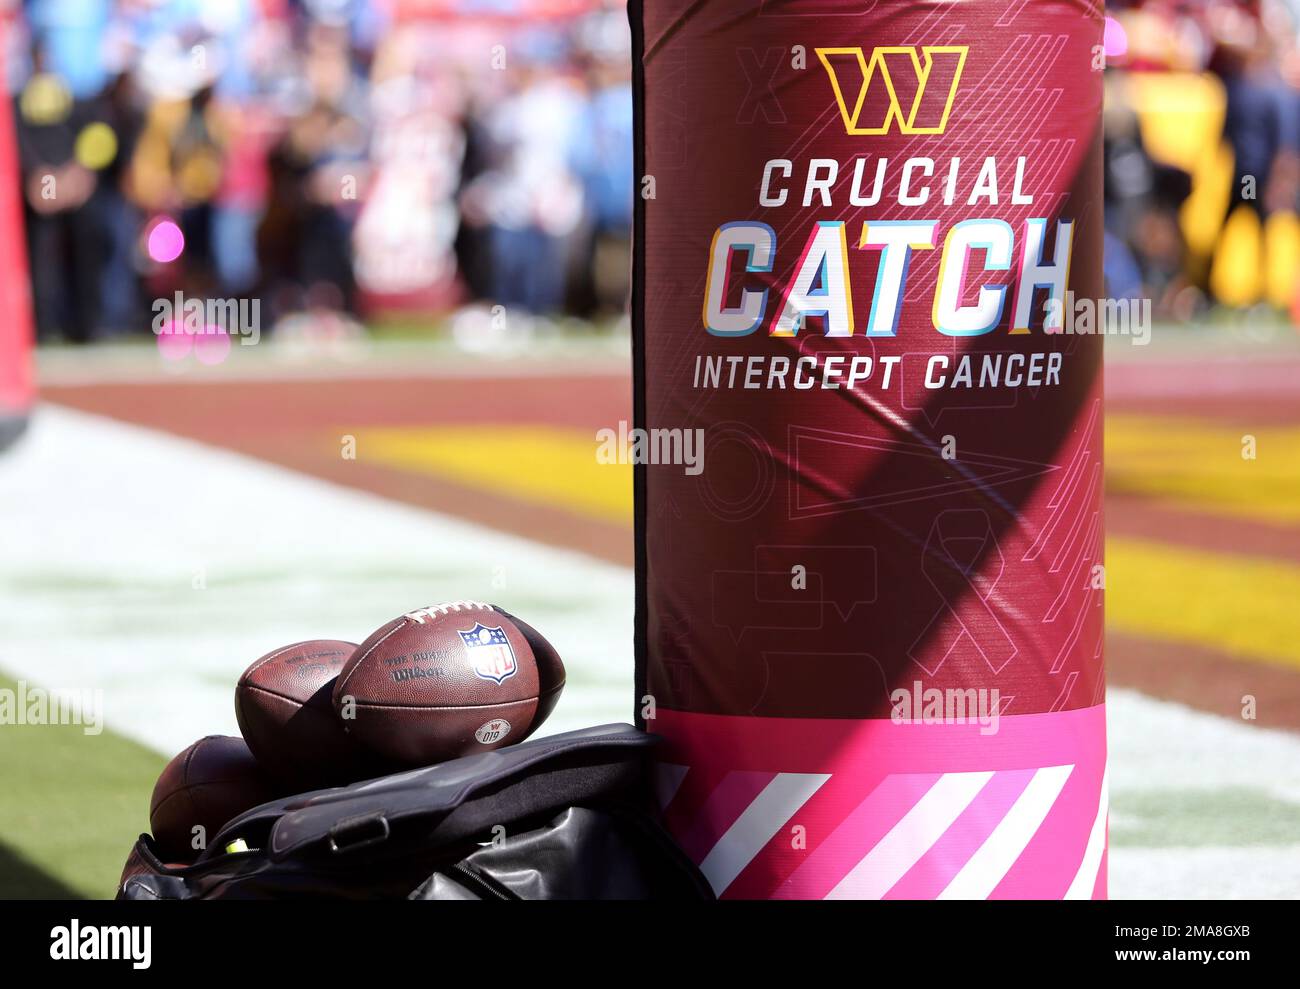 Crucial Catch signage is displayed at the game between the